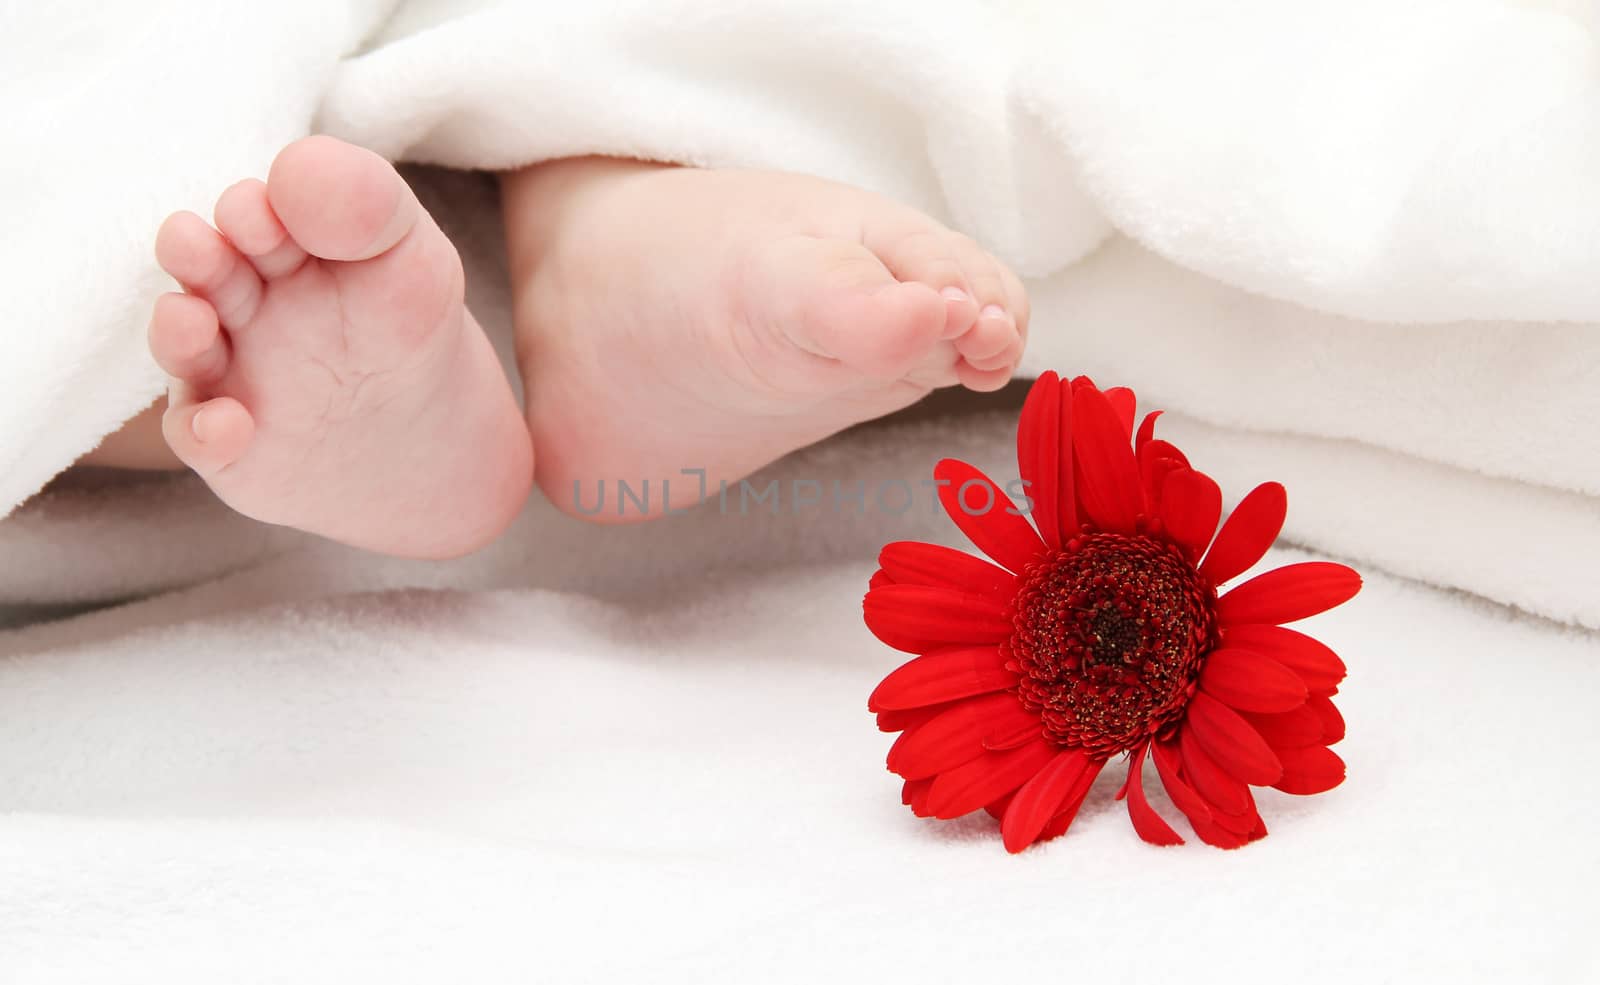 baby foots with a flower in the foreground